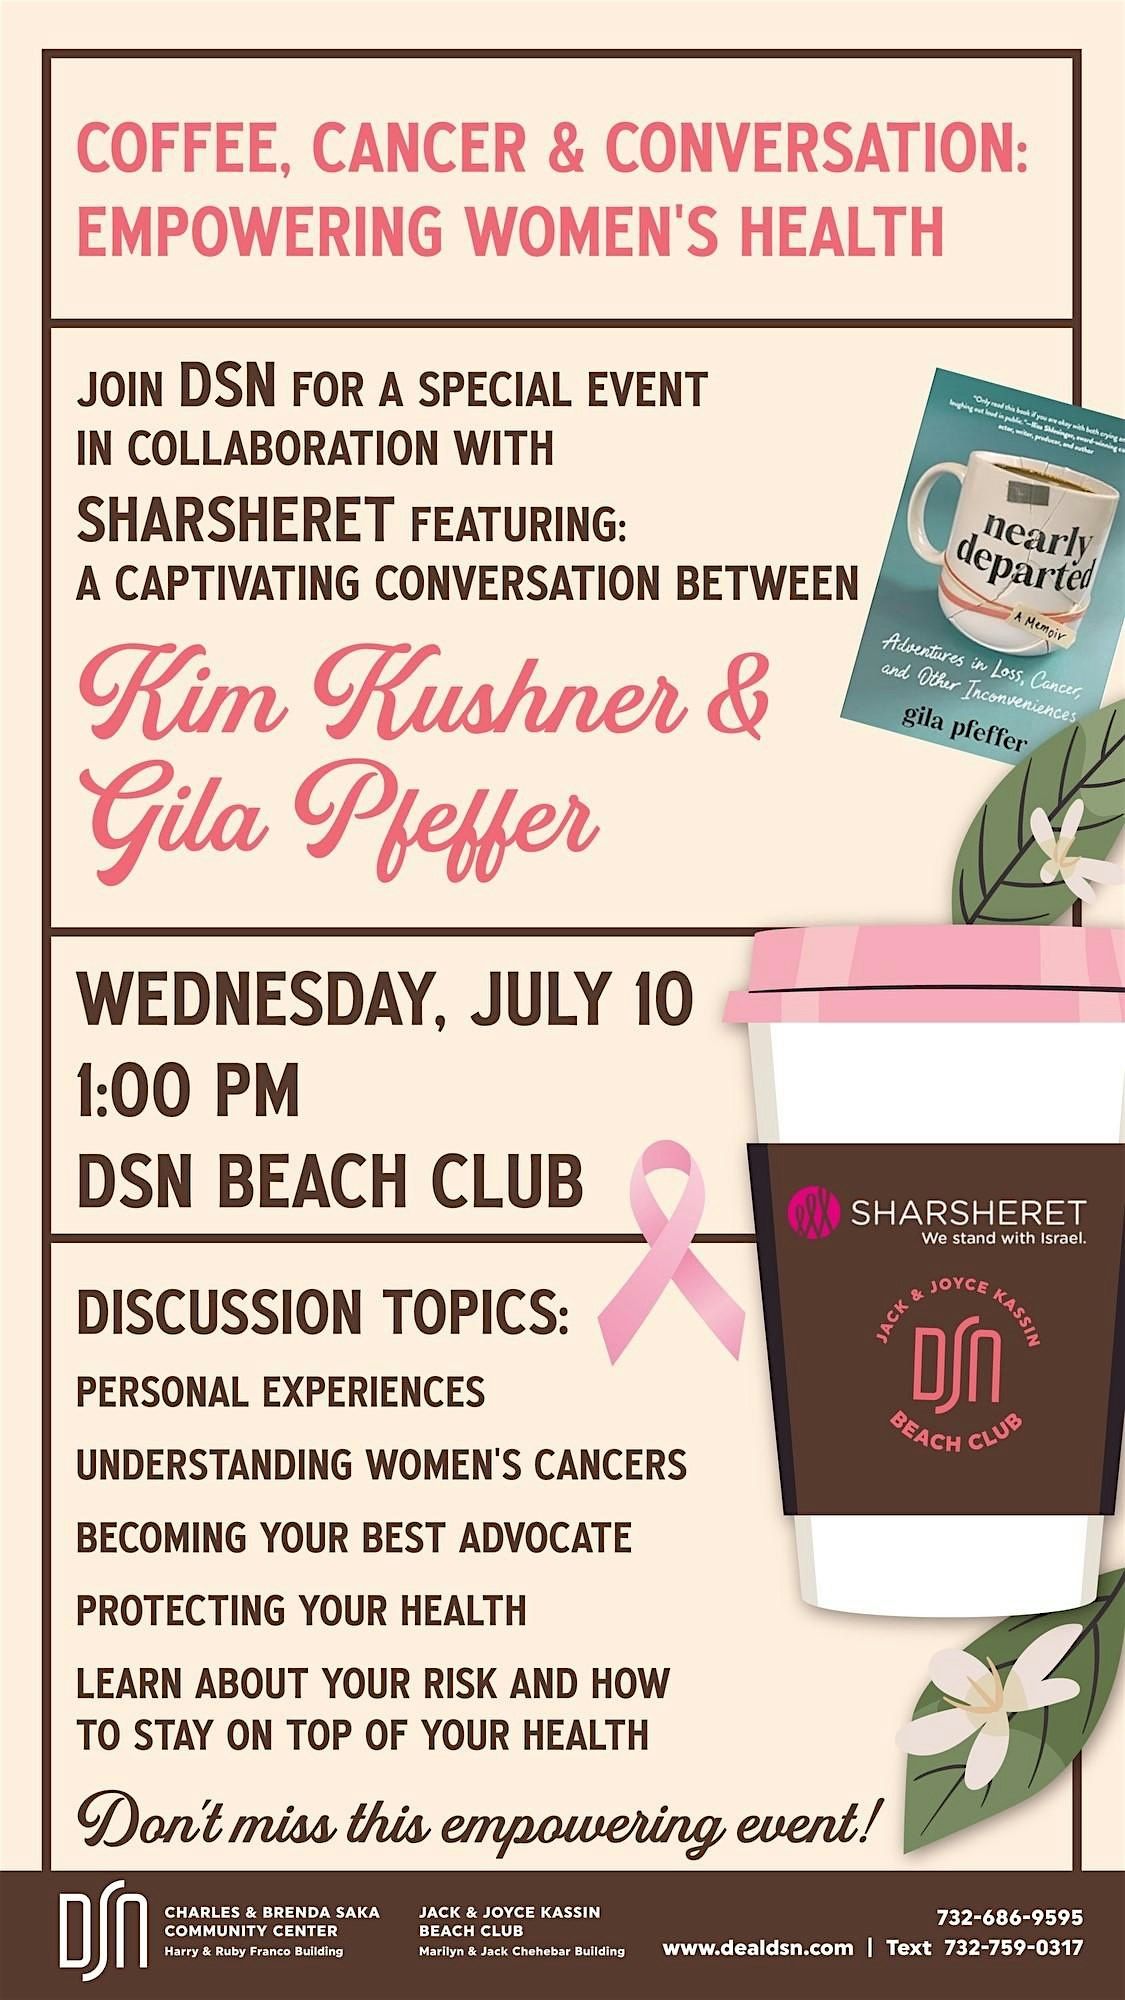 Coffee, Cancer and Conversations with Kim Kushner and Gila Pfeffer